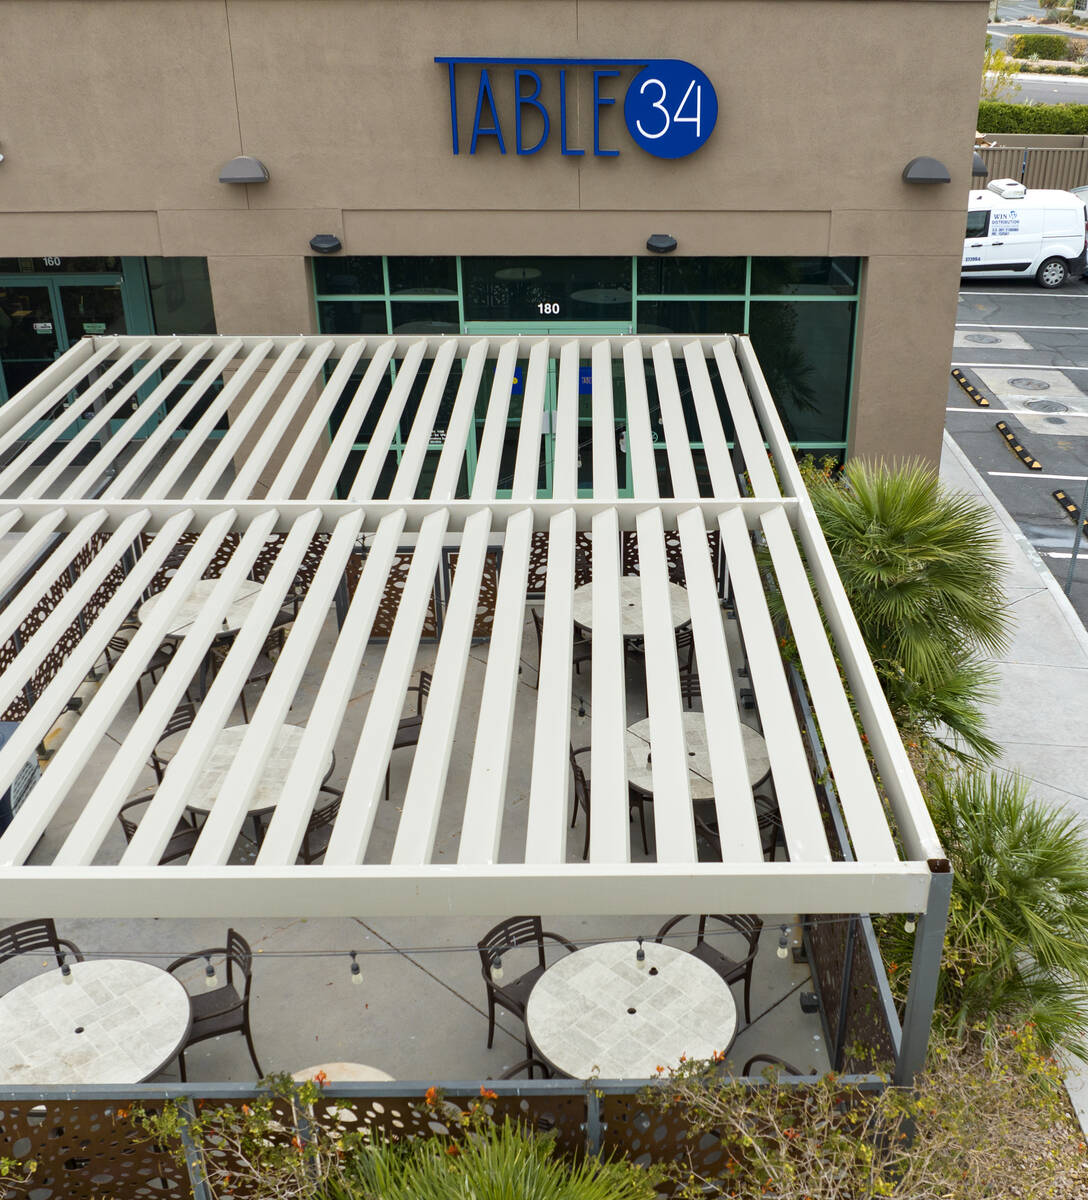 Table 34, a local restaurant, at 600 E. Warm Springs Road is shown, on Friday, Feb. 24, 2023, i ...